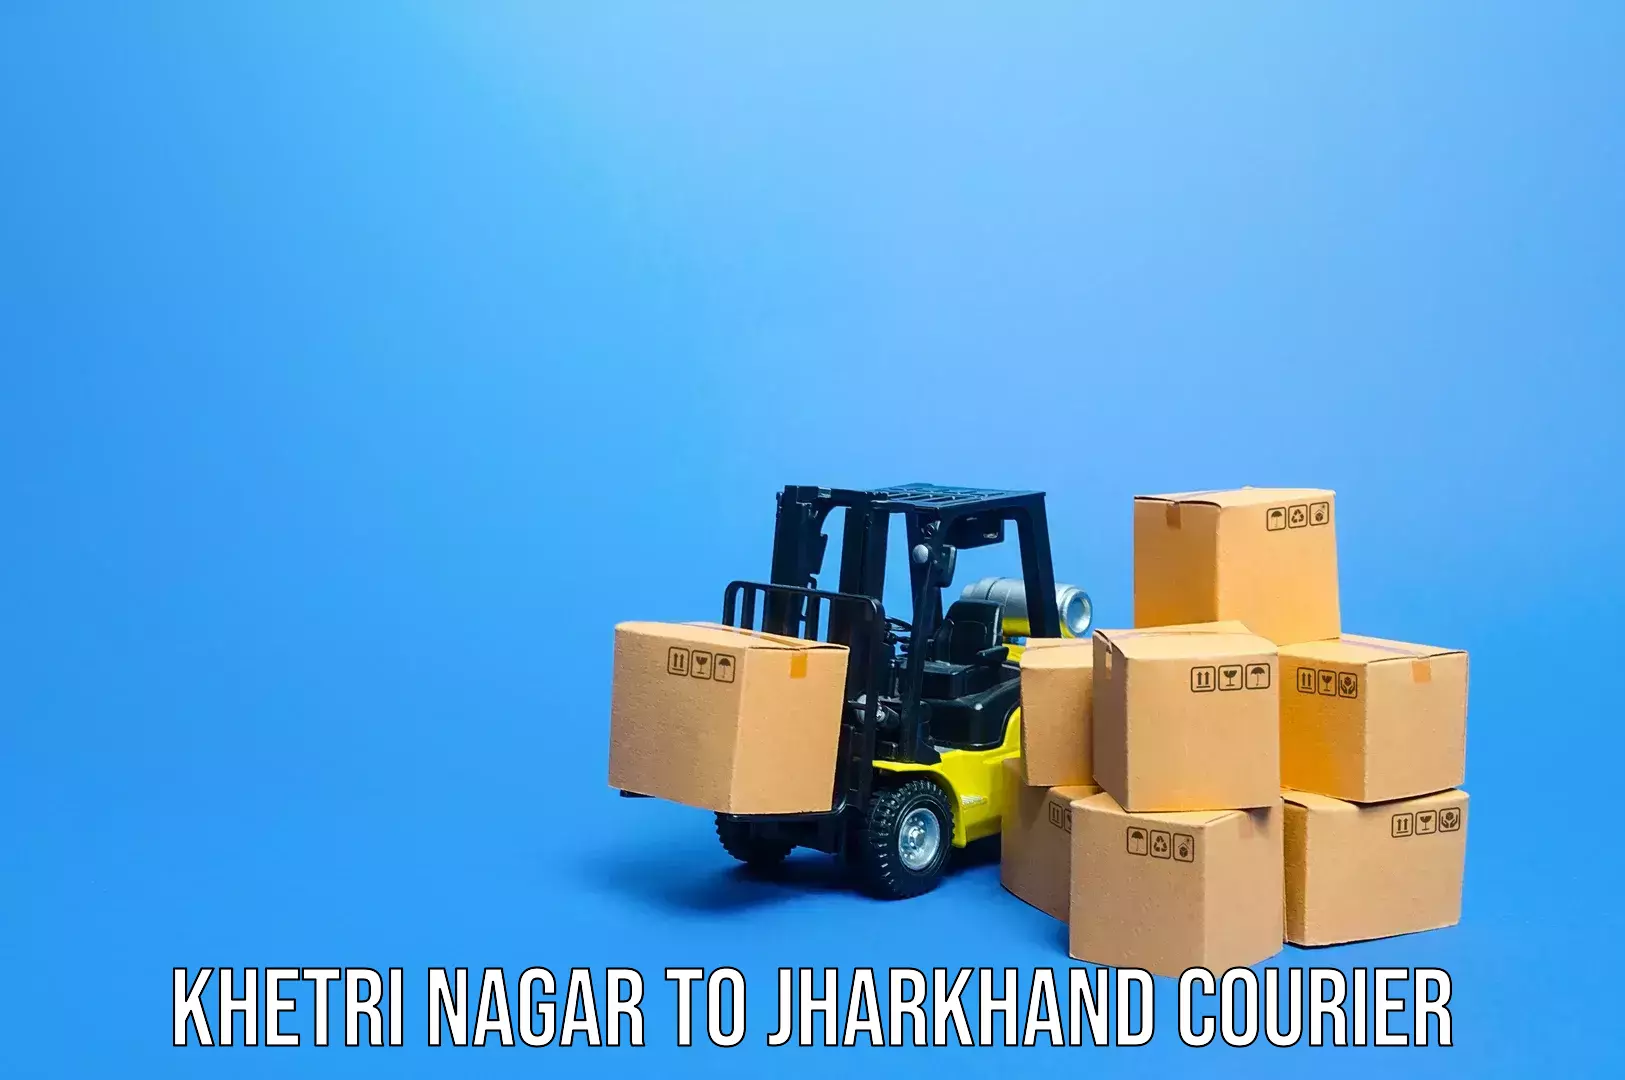 Premium luggage delivery in Khetri Nagar to Jharkhand